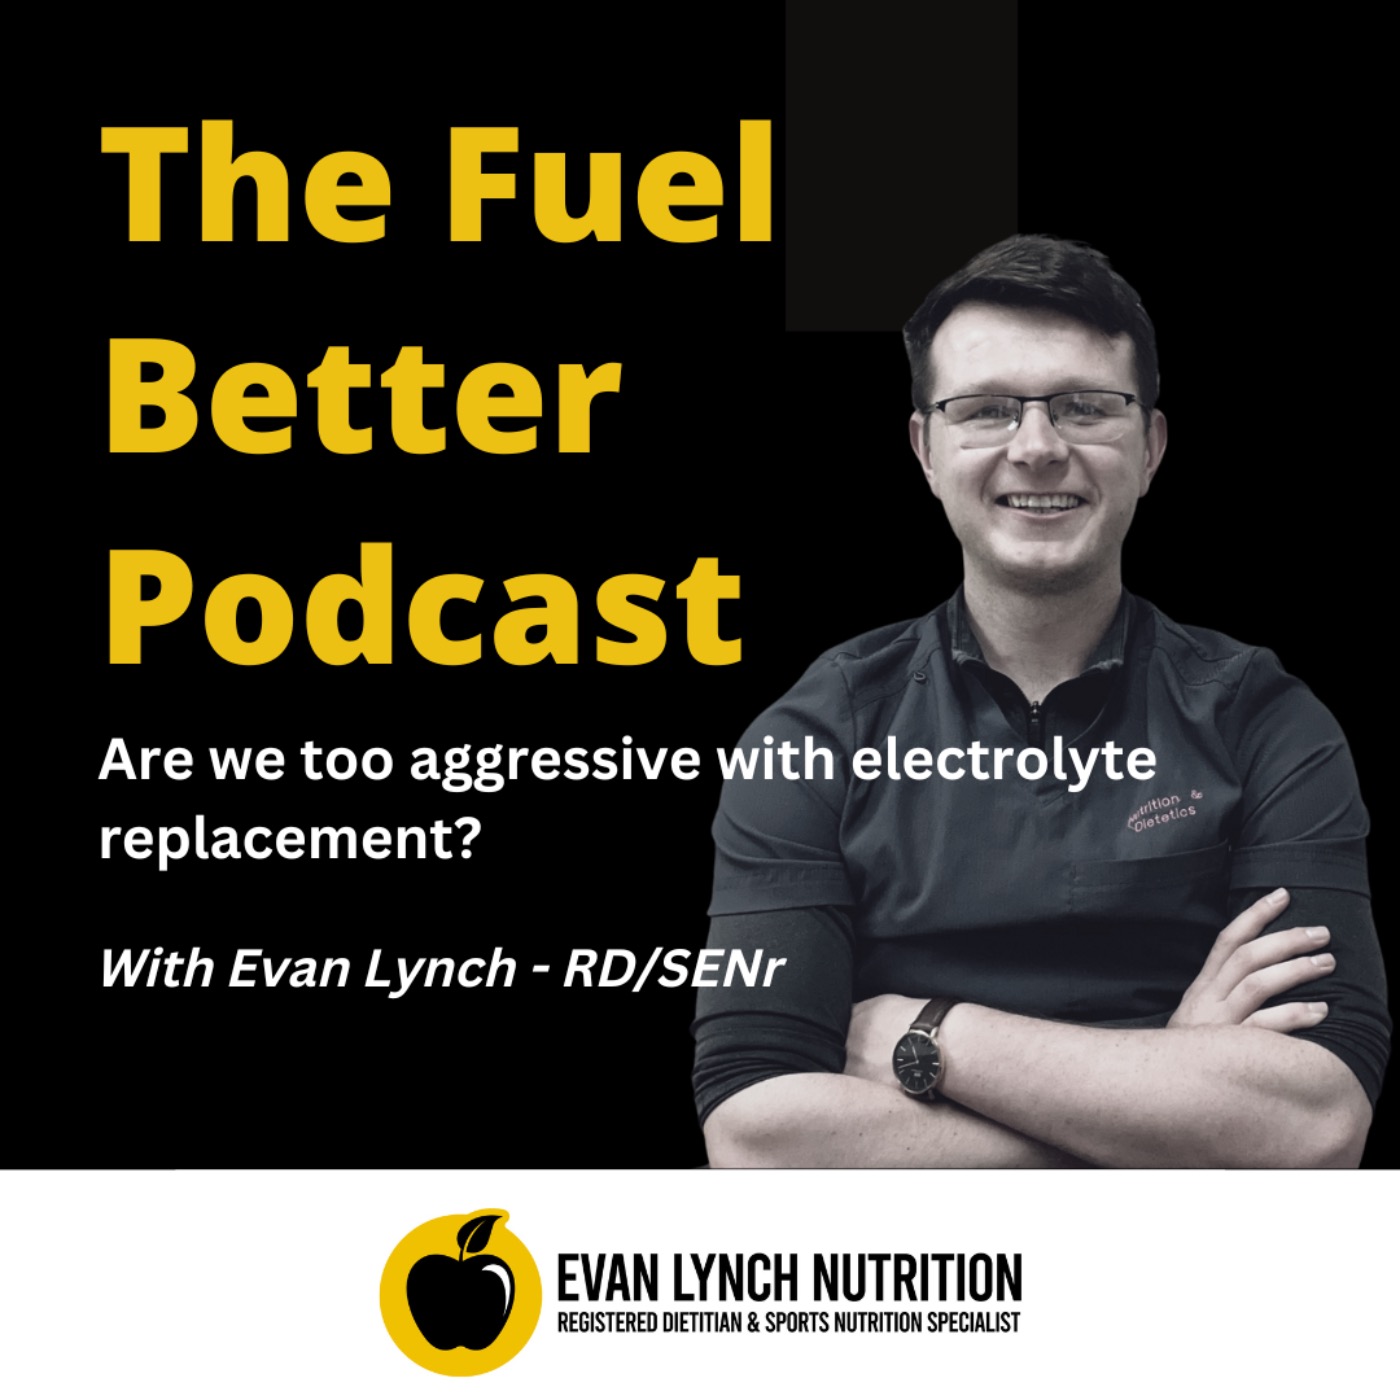 Are we too aggressive with electrolyte replacement?